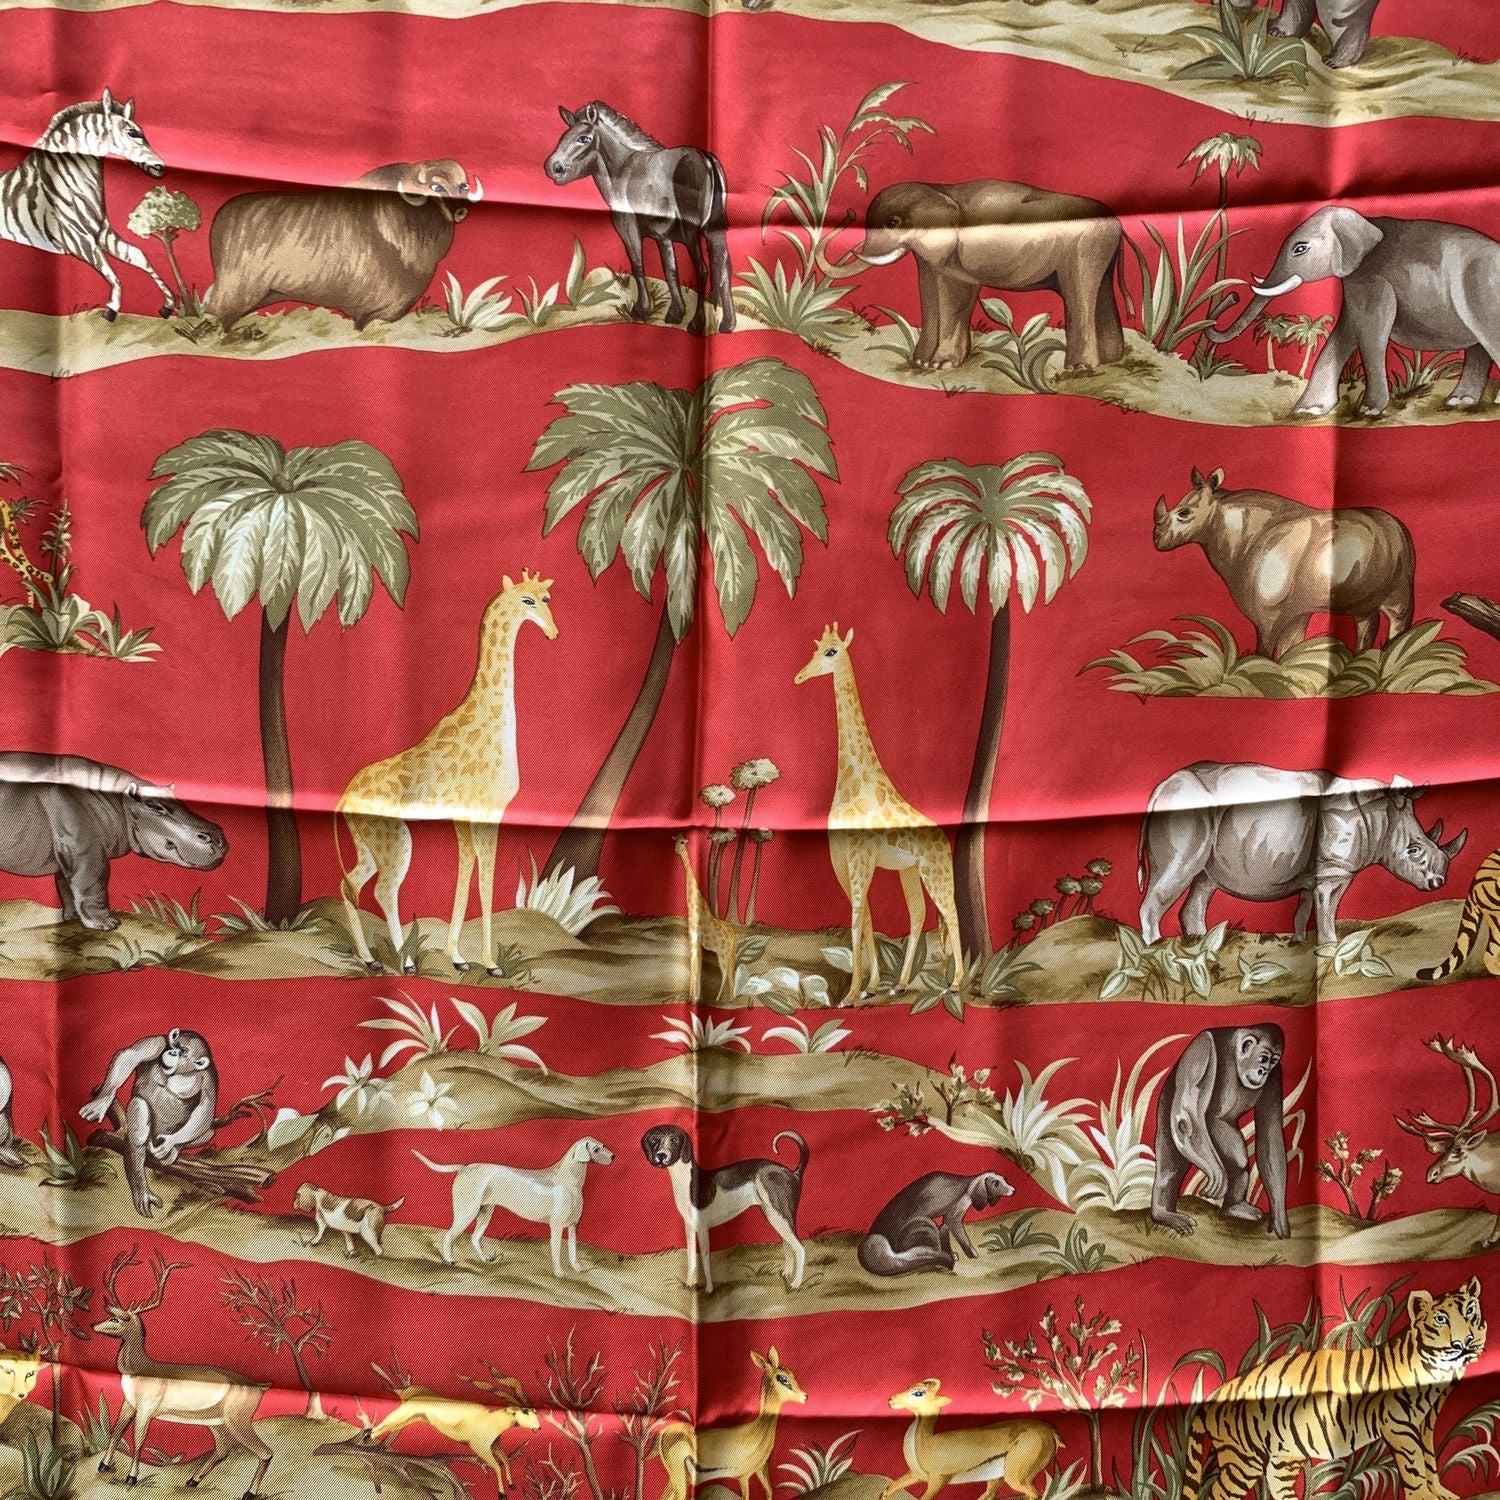 Vintage Salvatore Ferragamo silk scarf. Animal print. Red color. Hand rolled edges. Made in Italy. Composition: 100% silk. Measurements: 34.5 x 34.5 inches - 87.5 x 87.5 cm. 'Salvatore Ferragamo' signature printed on the scarf Details MATERIAL: Silk